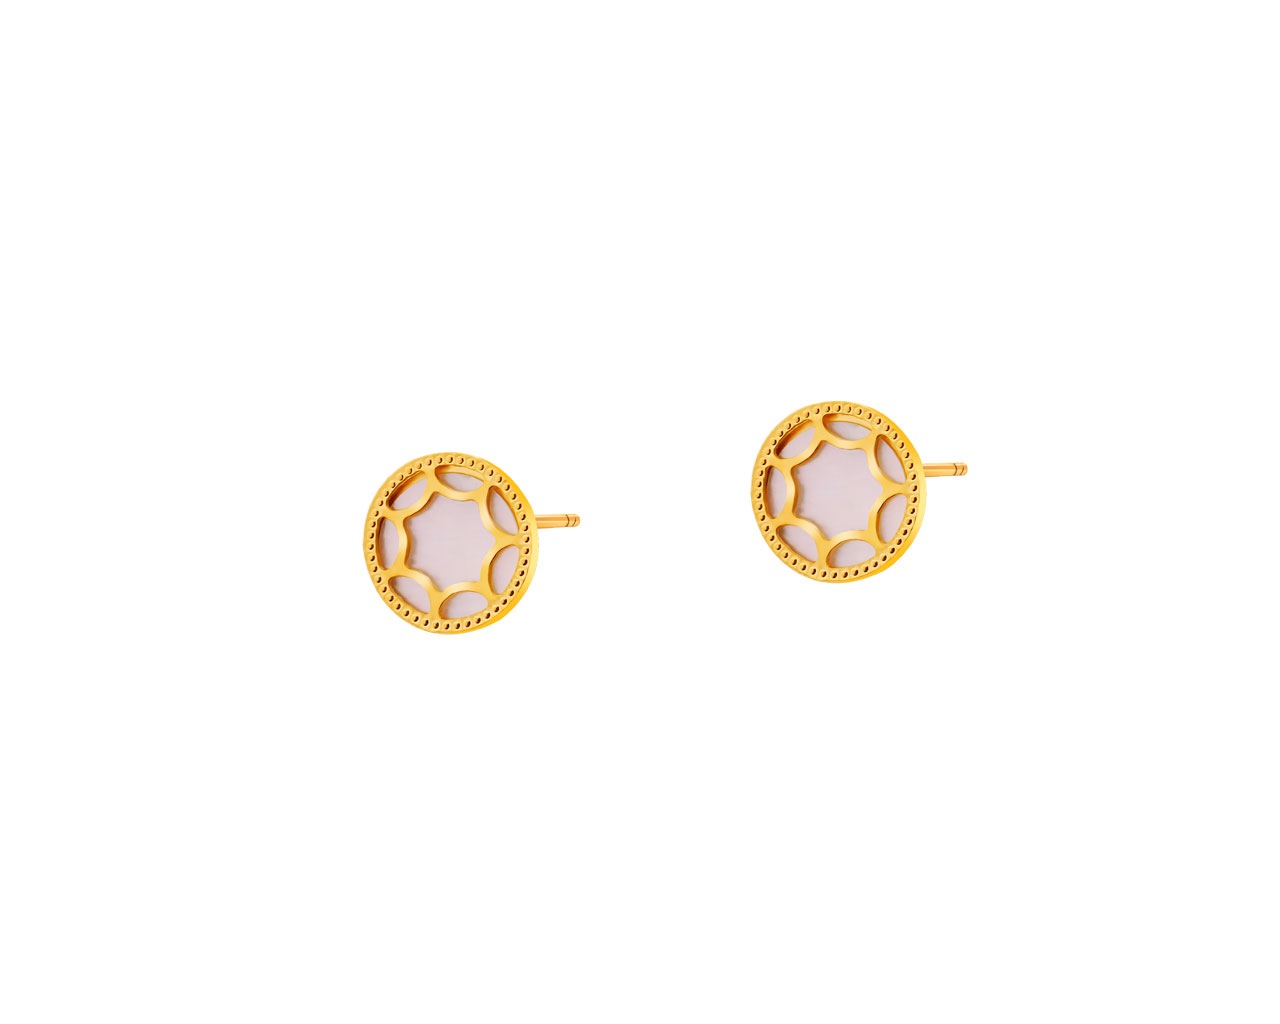 9 K Yellow Gold Earrings with Mother Of Pearl